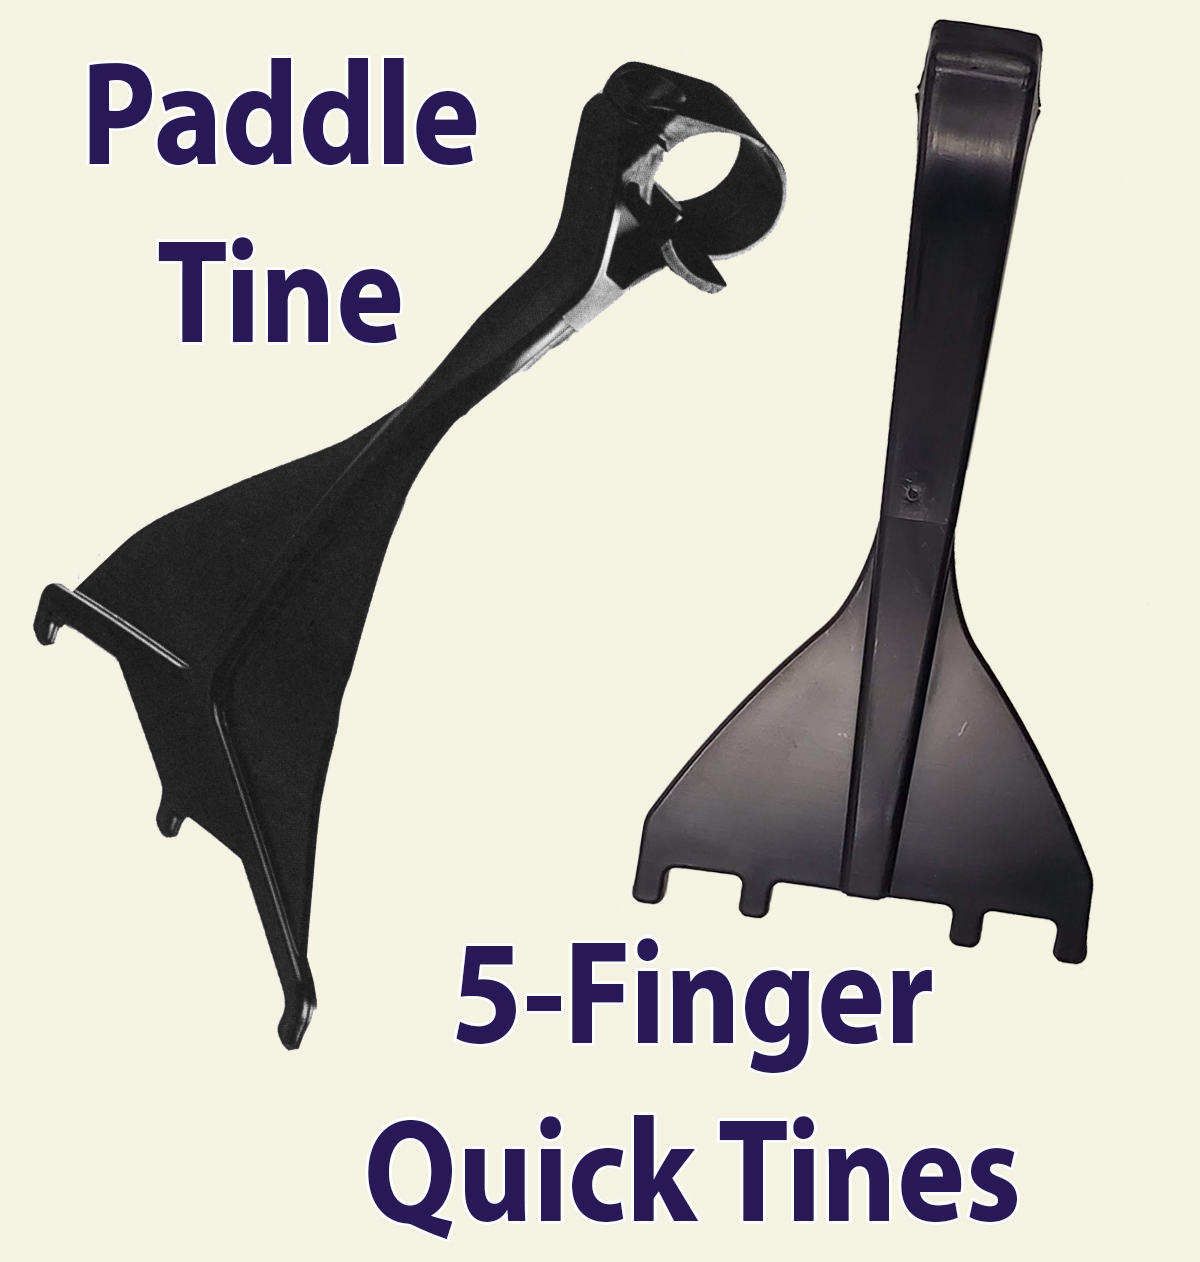 Paddle Tines and Five-Finger Quick Tines